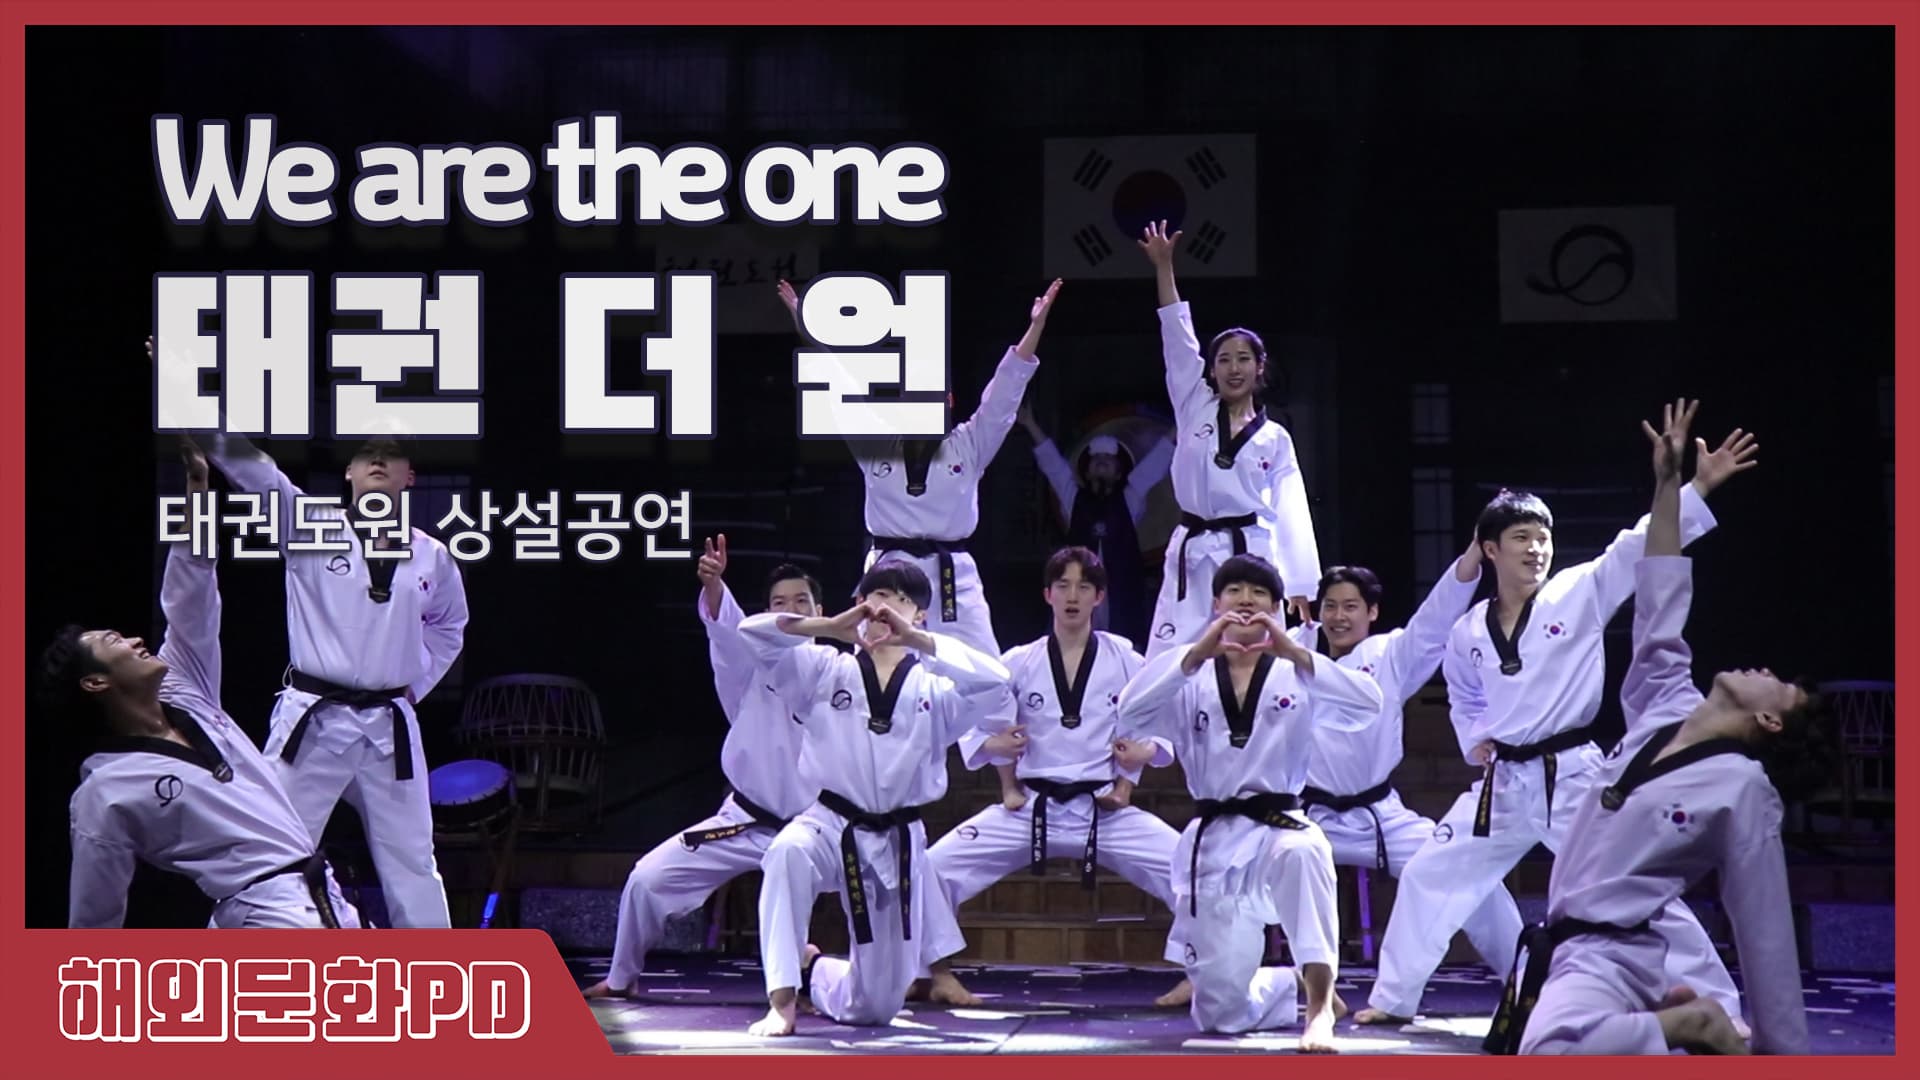 We are the one, 태권 더 원